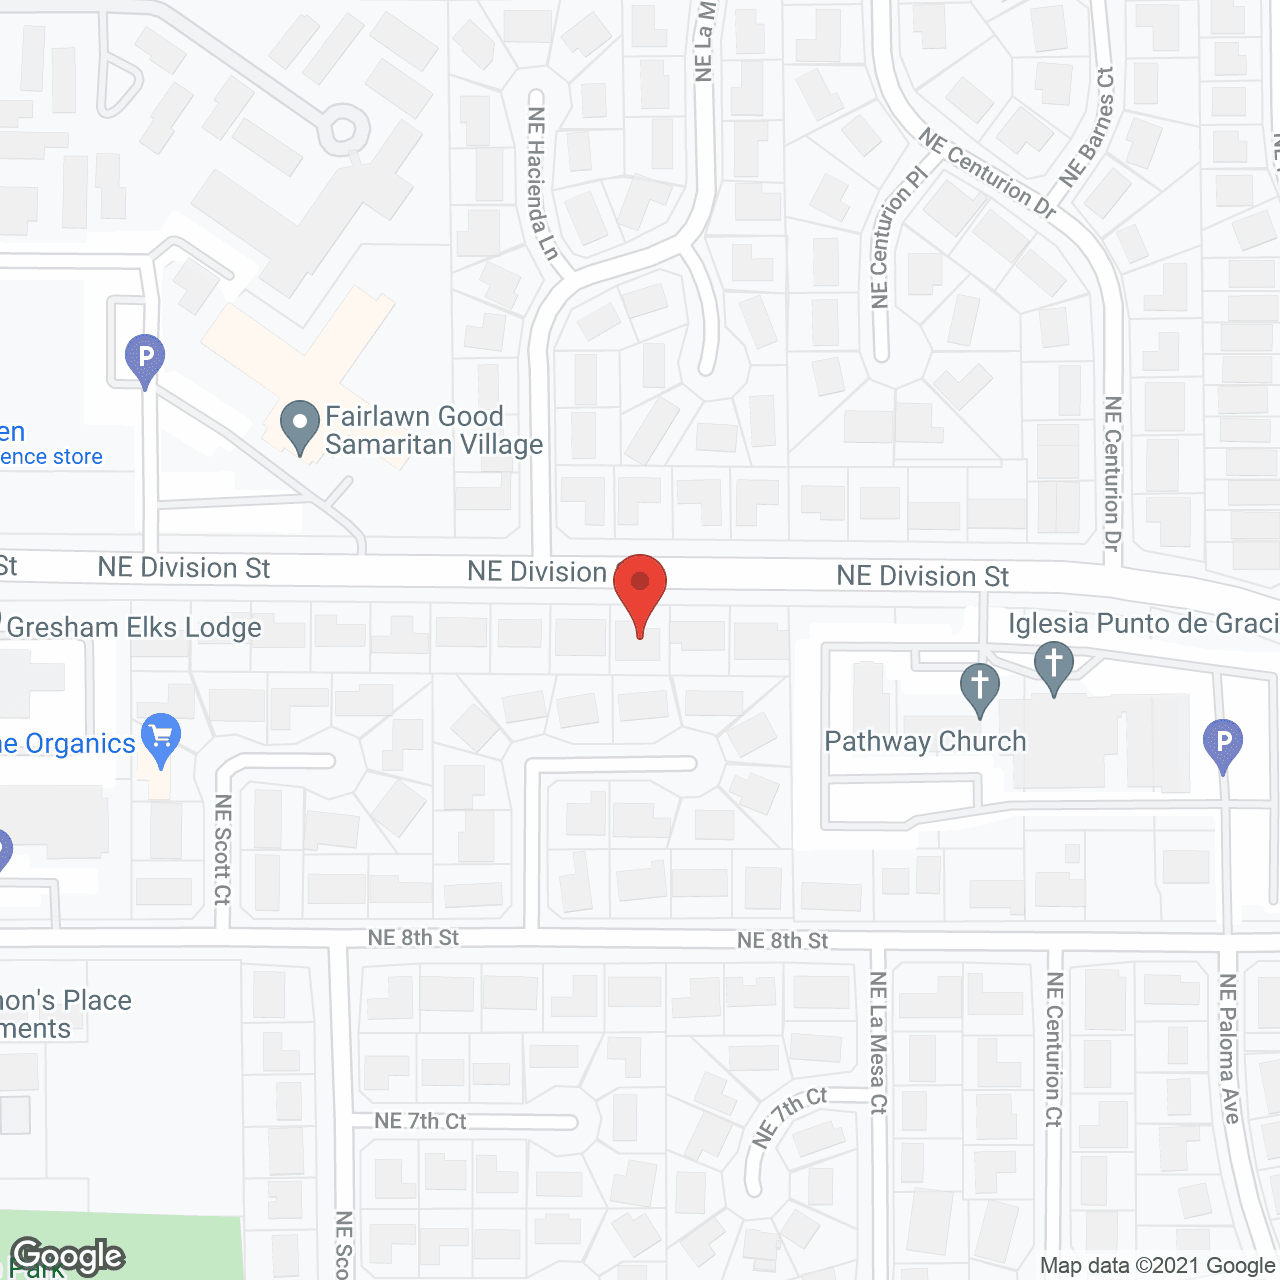 Fit Adult Care Home LLC in google map